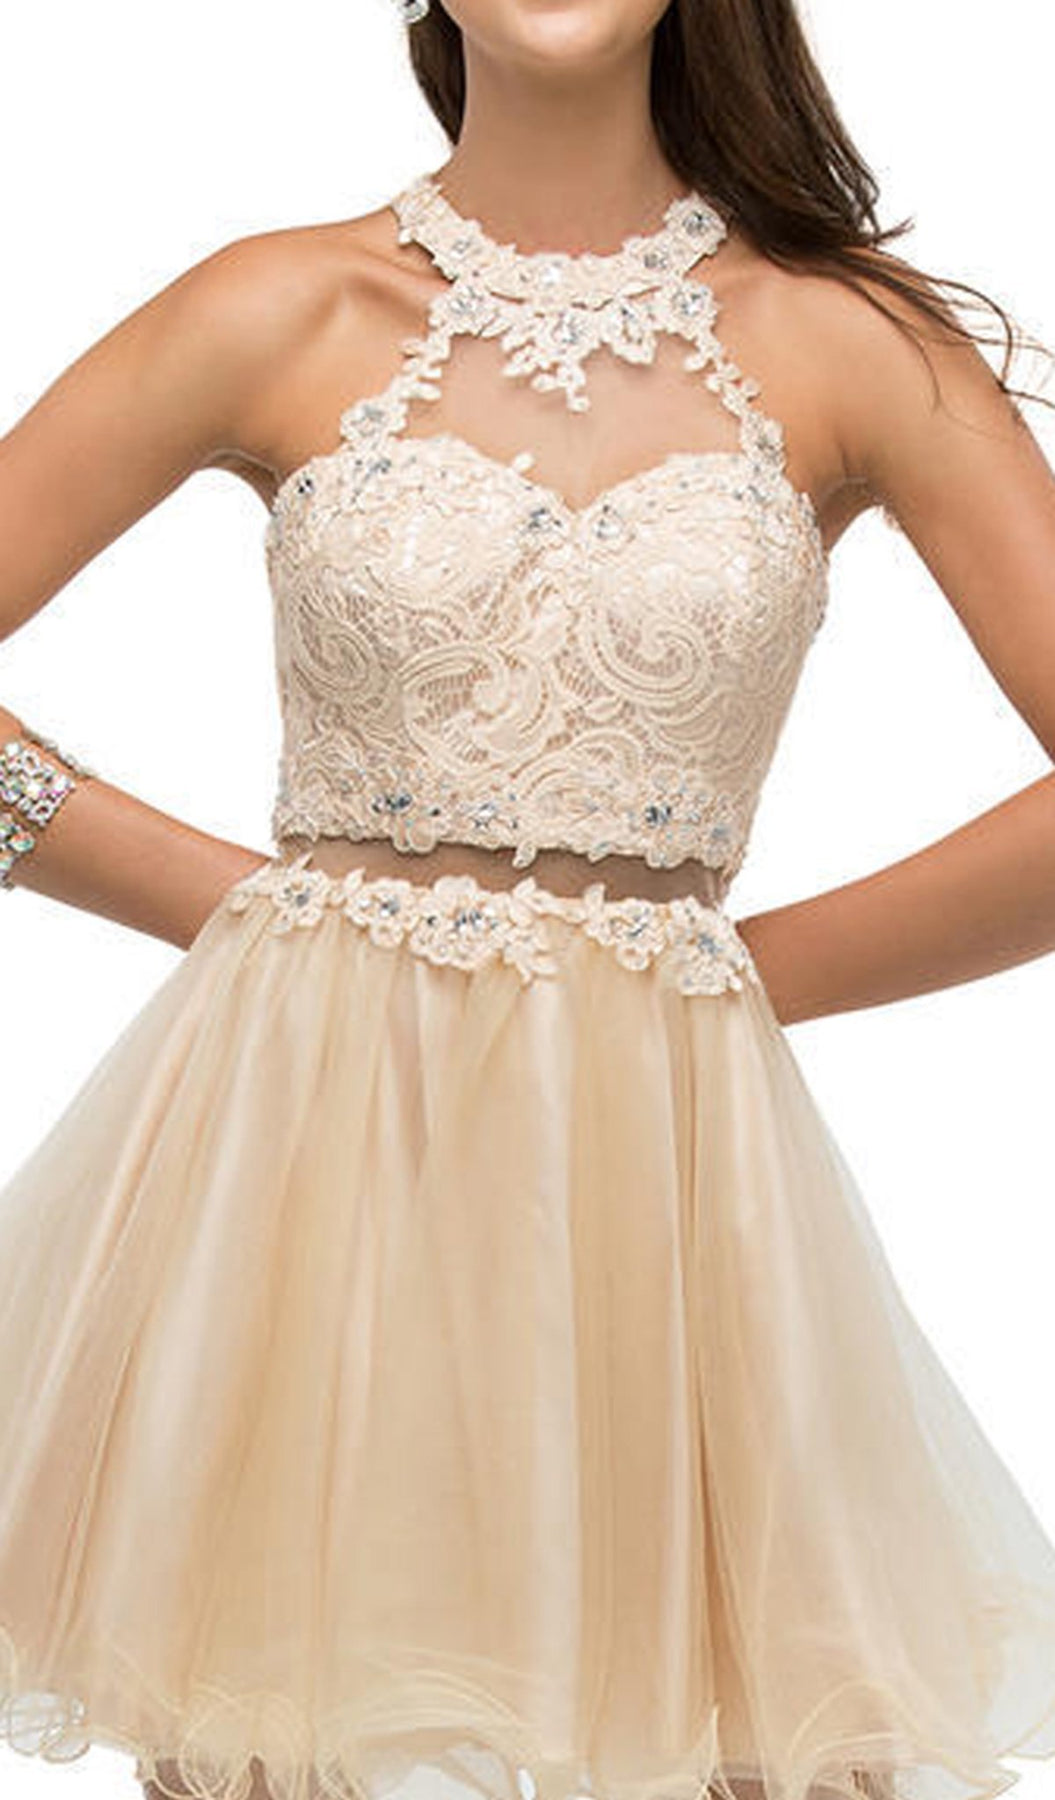 Dancing Queen - 9631 Appliqued Illusion High Neck Two-Piece Cocktail Dress In Nude